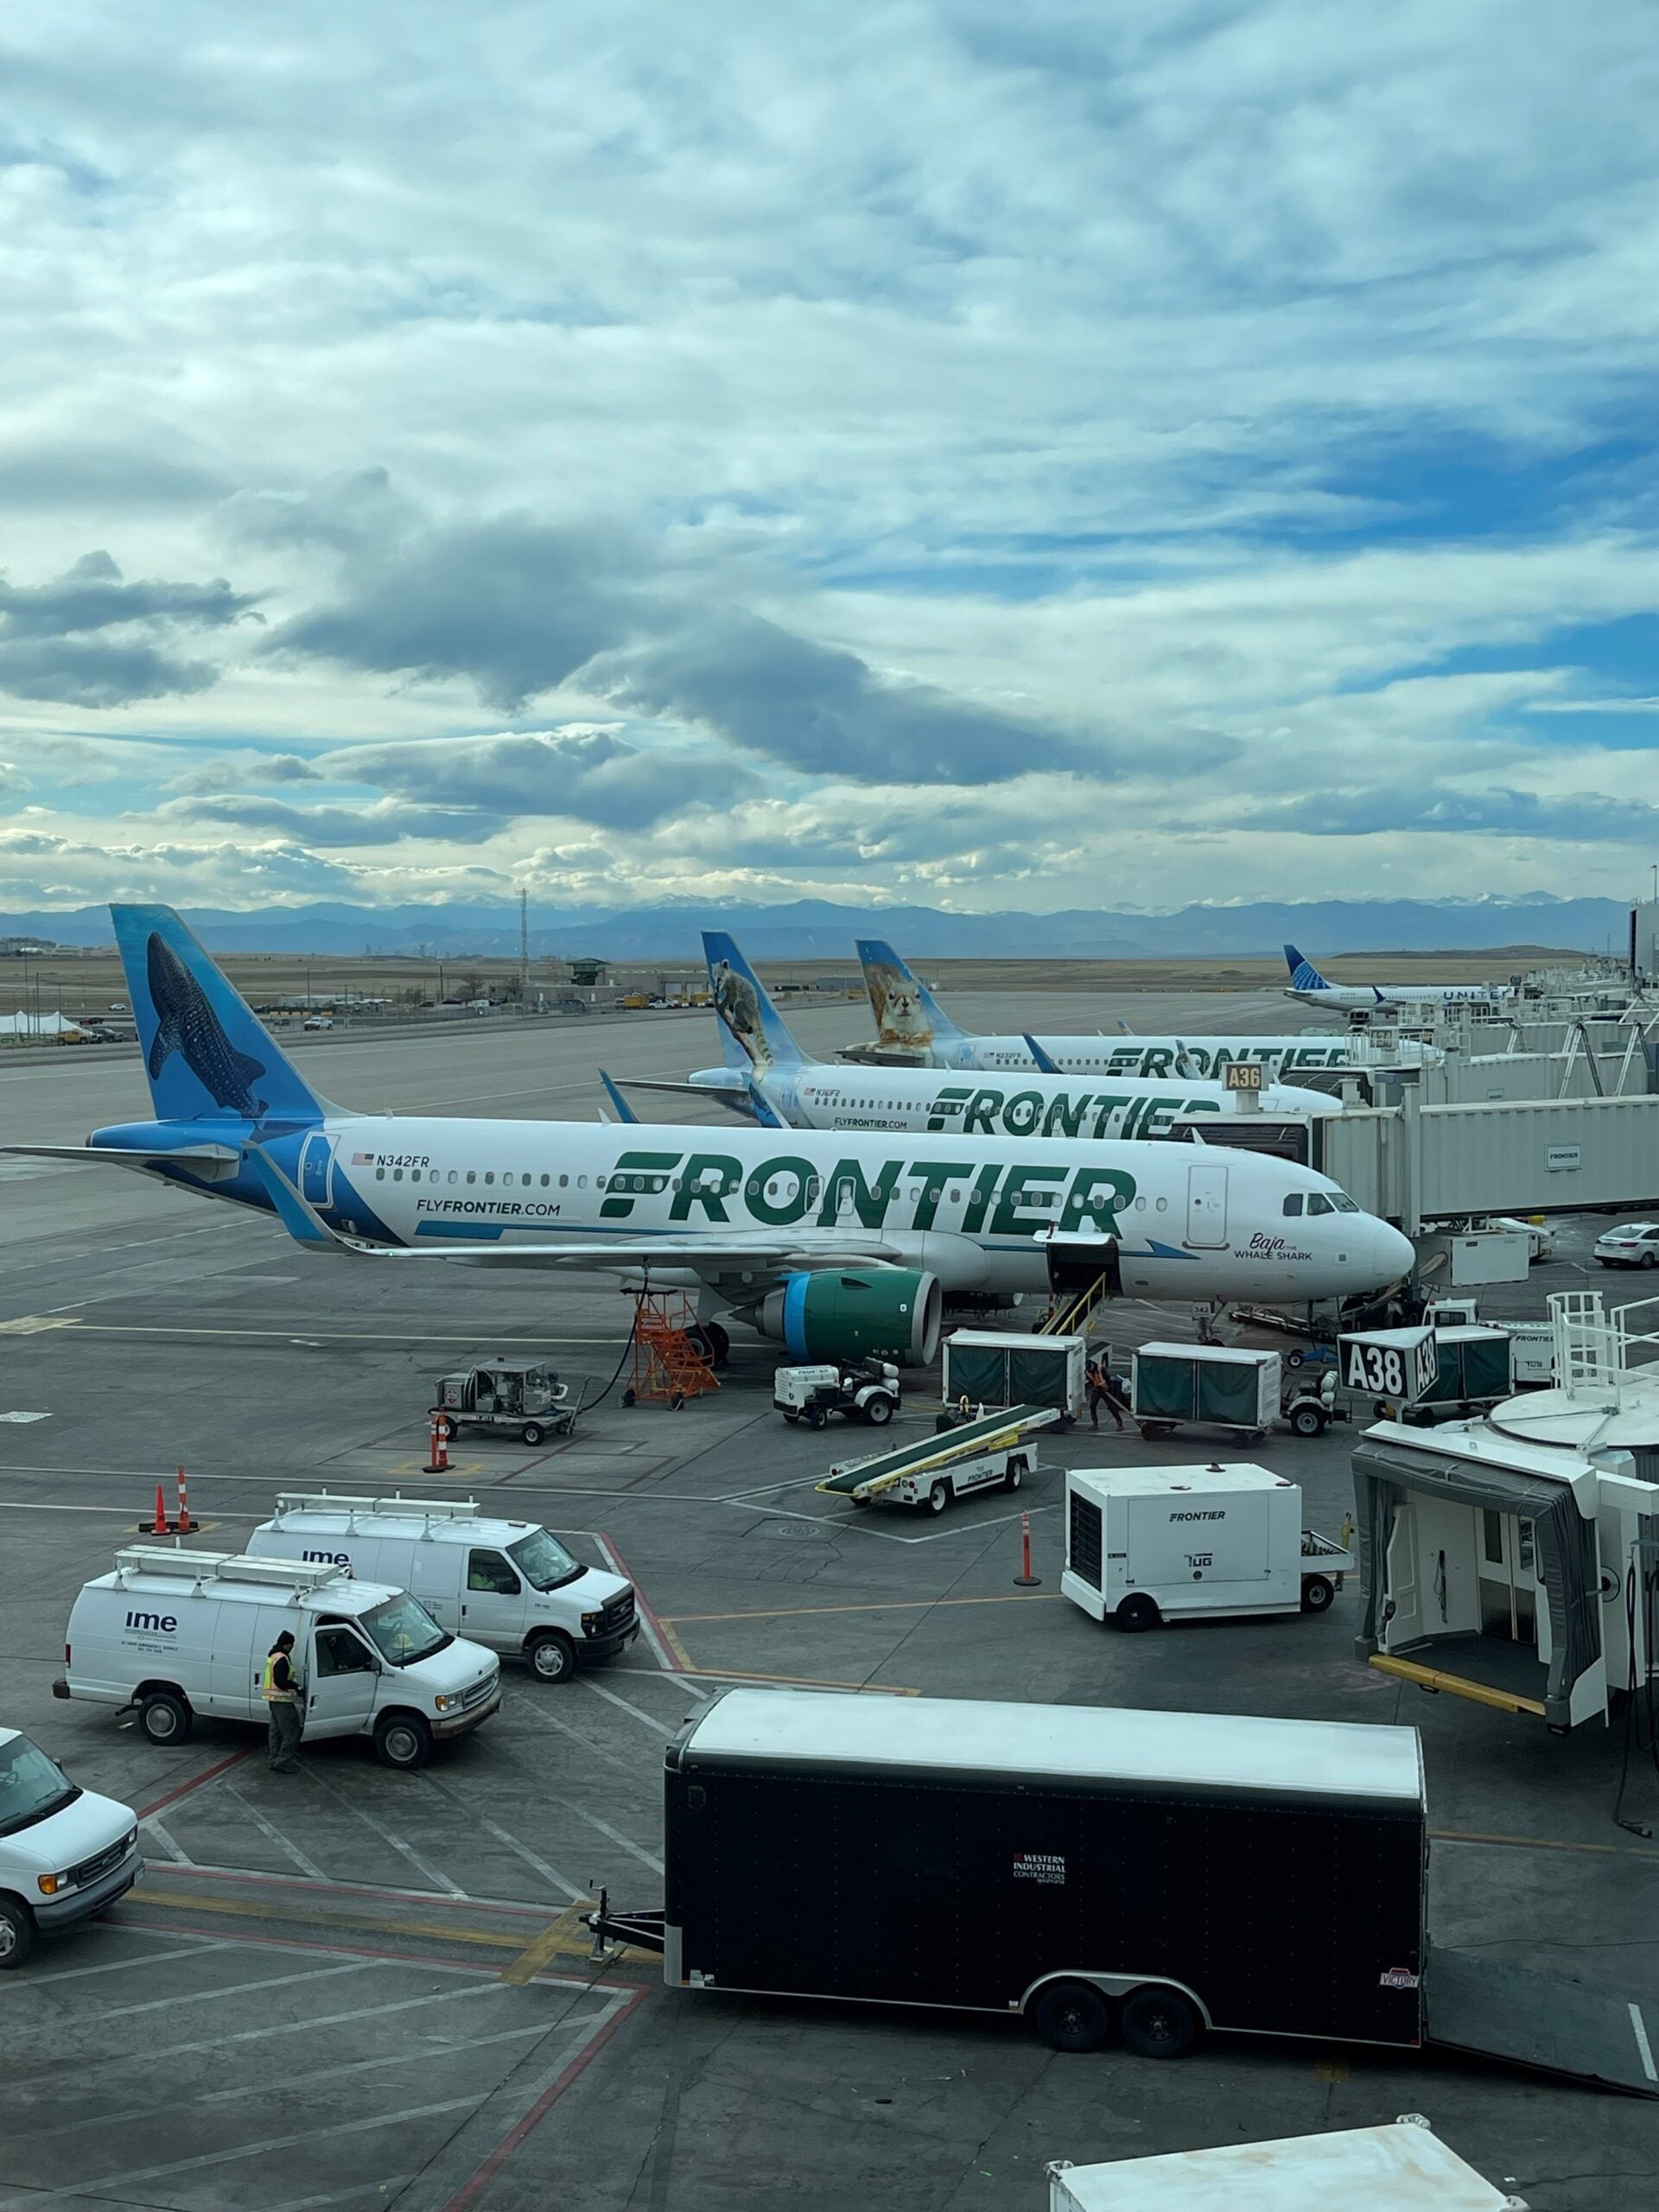 Frontier Airways provides 7 nonstop routes